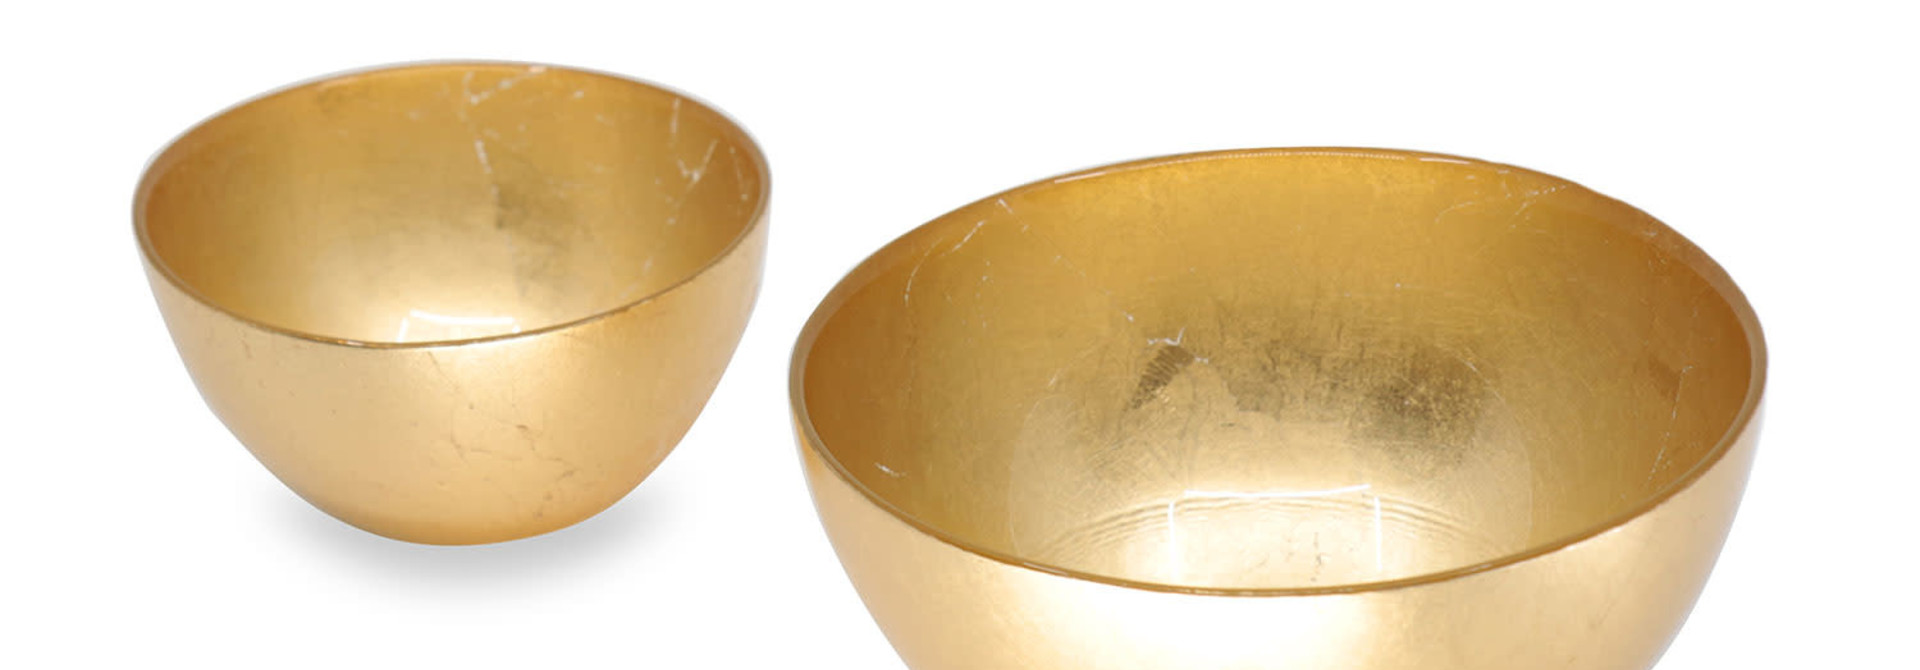 New Orleans | The  Glass Collection, Round Foil Leafing Bowl,  Gold - 4.5 Inch x 4.5 Inch x 2 Inch